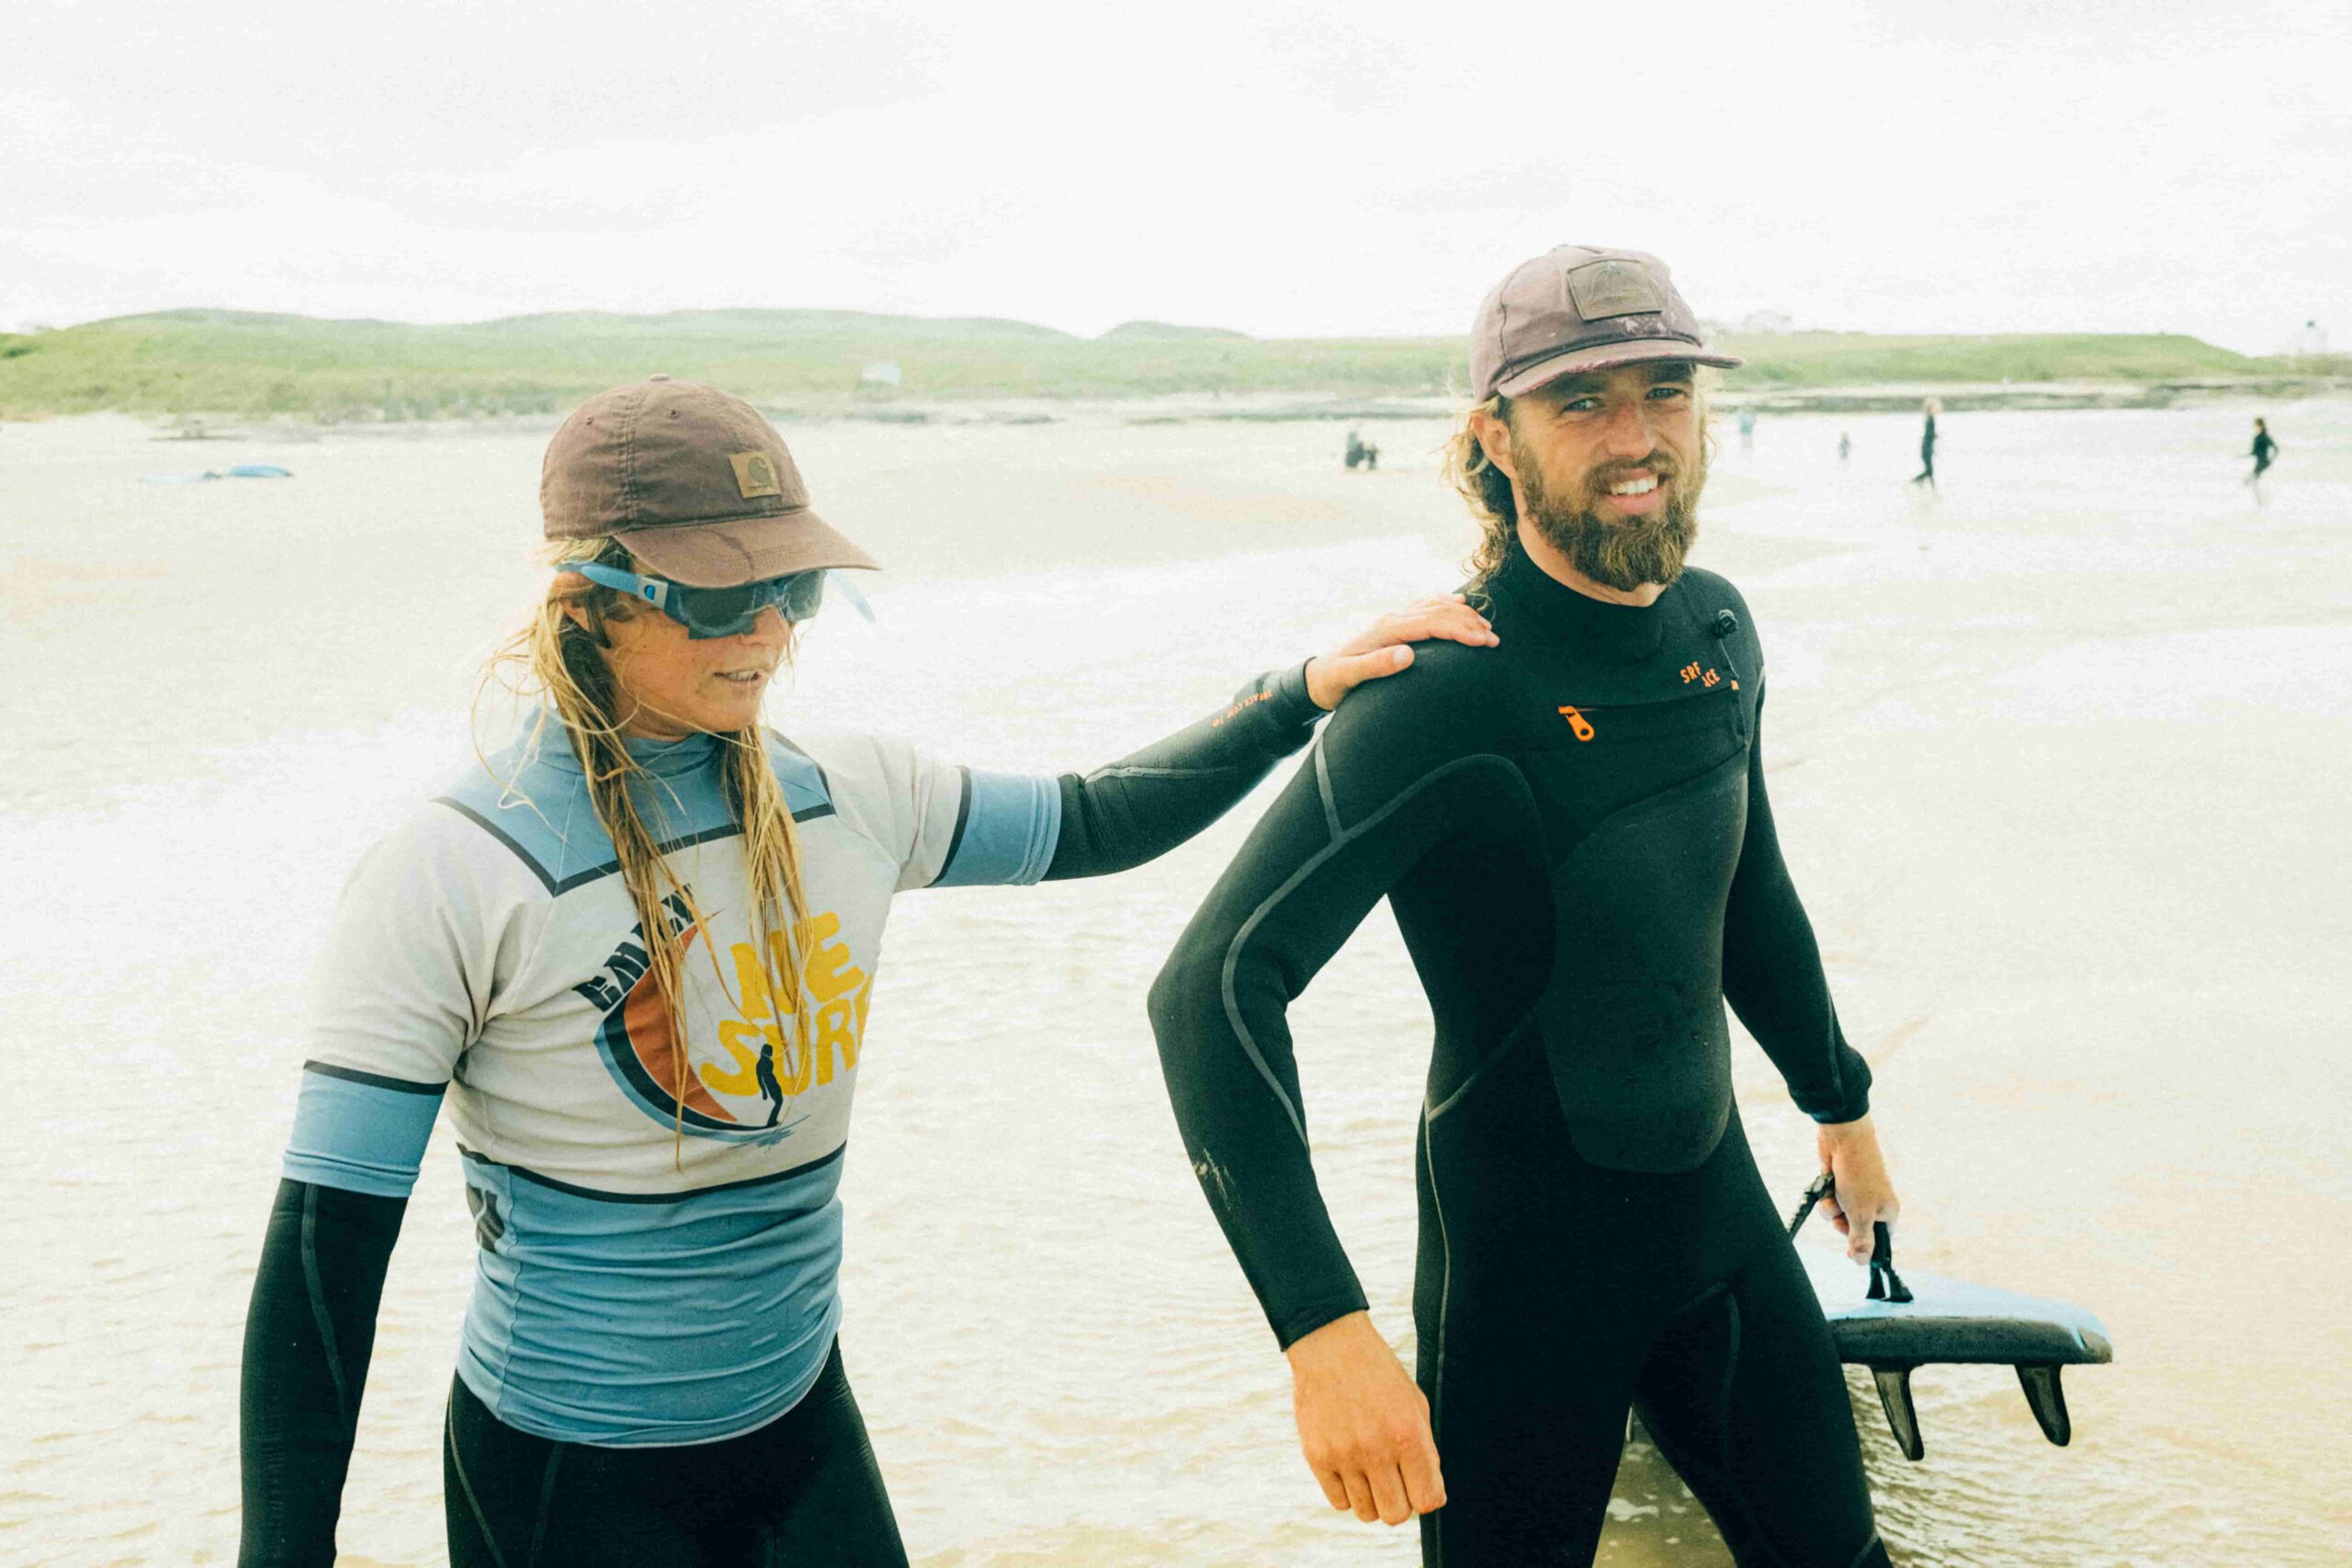 Practical training for teaching surfers with visual impairment